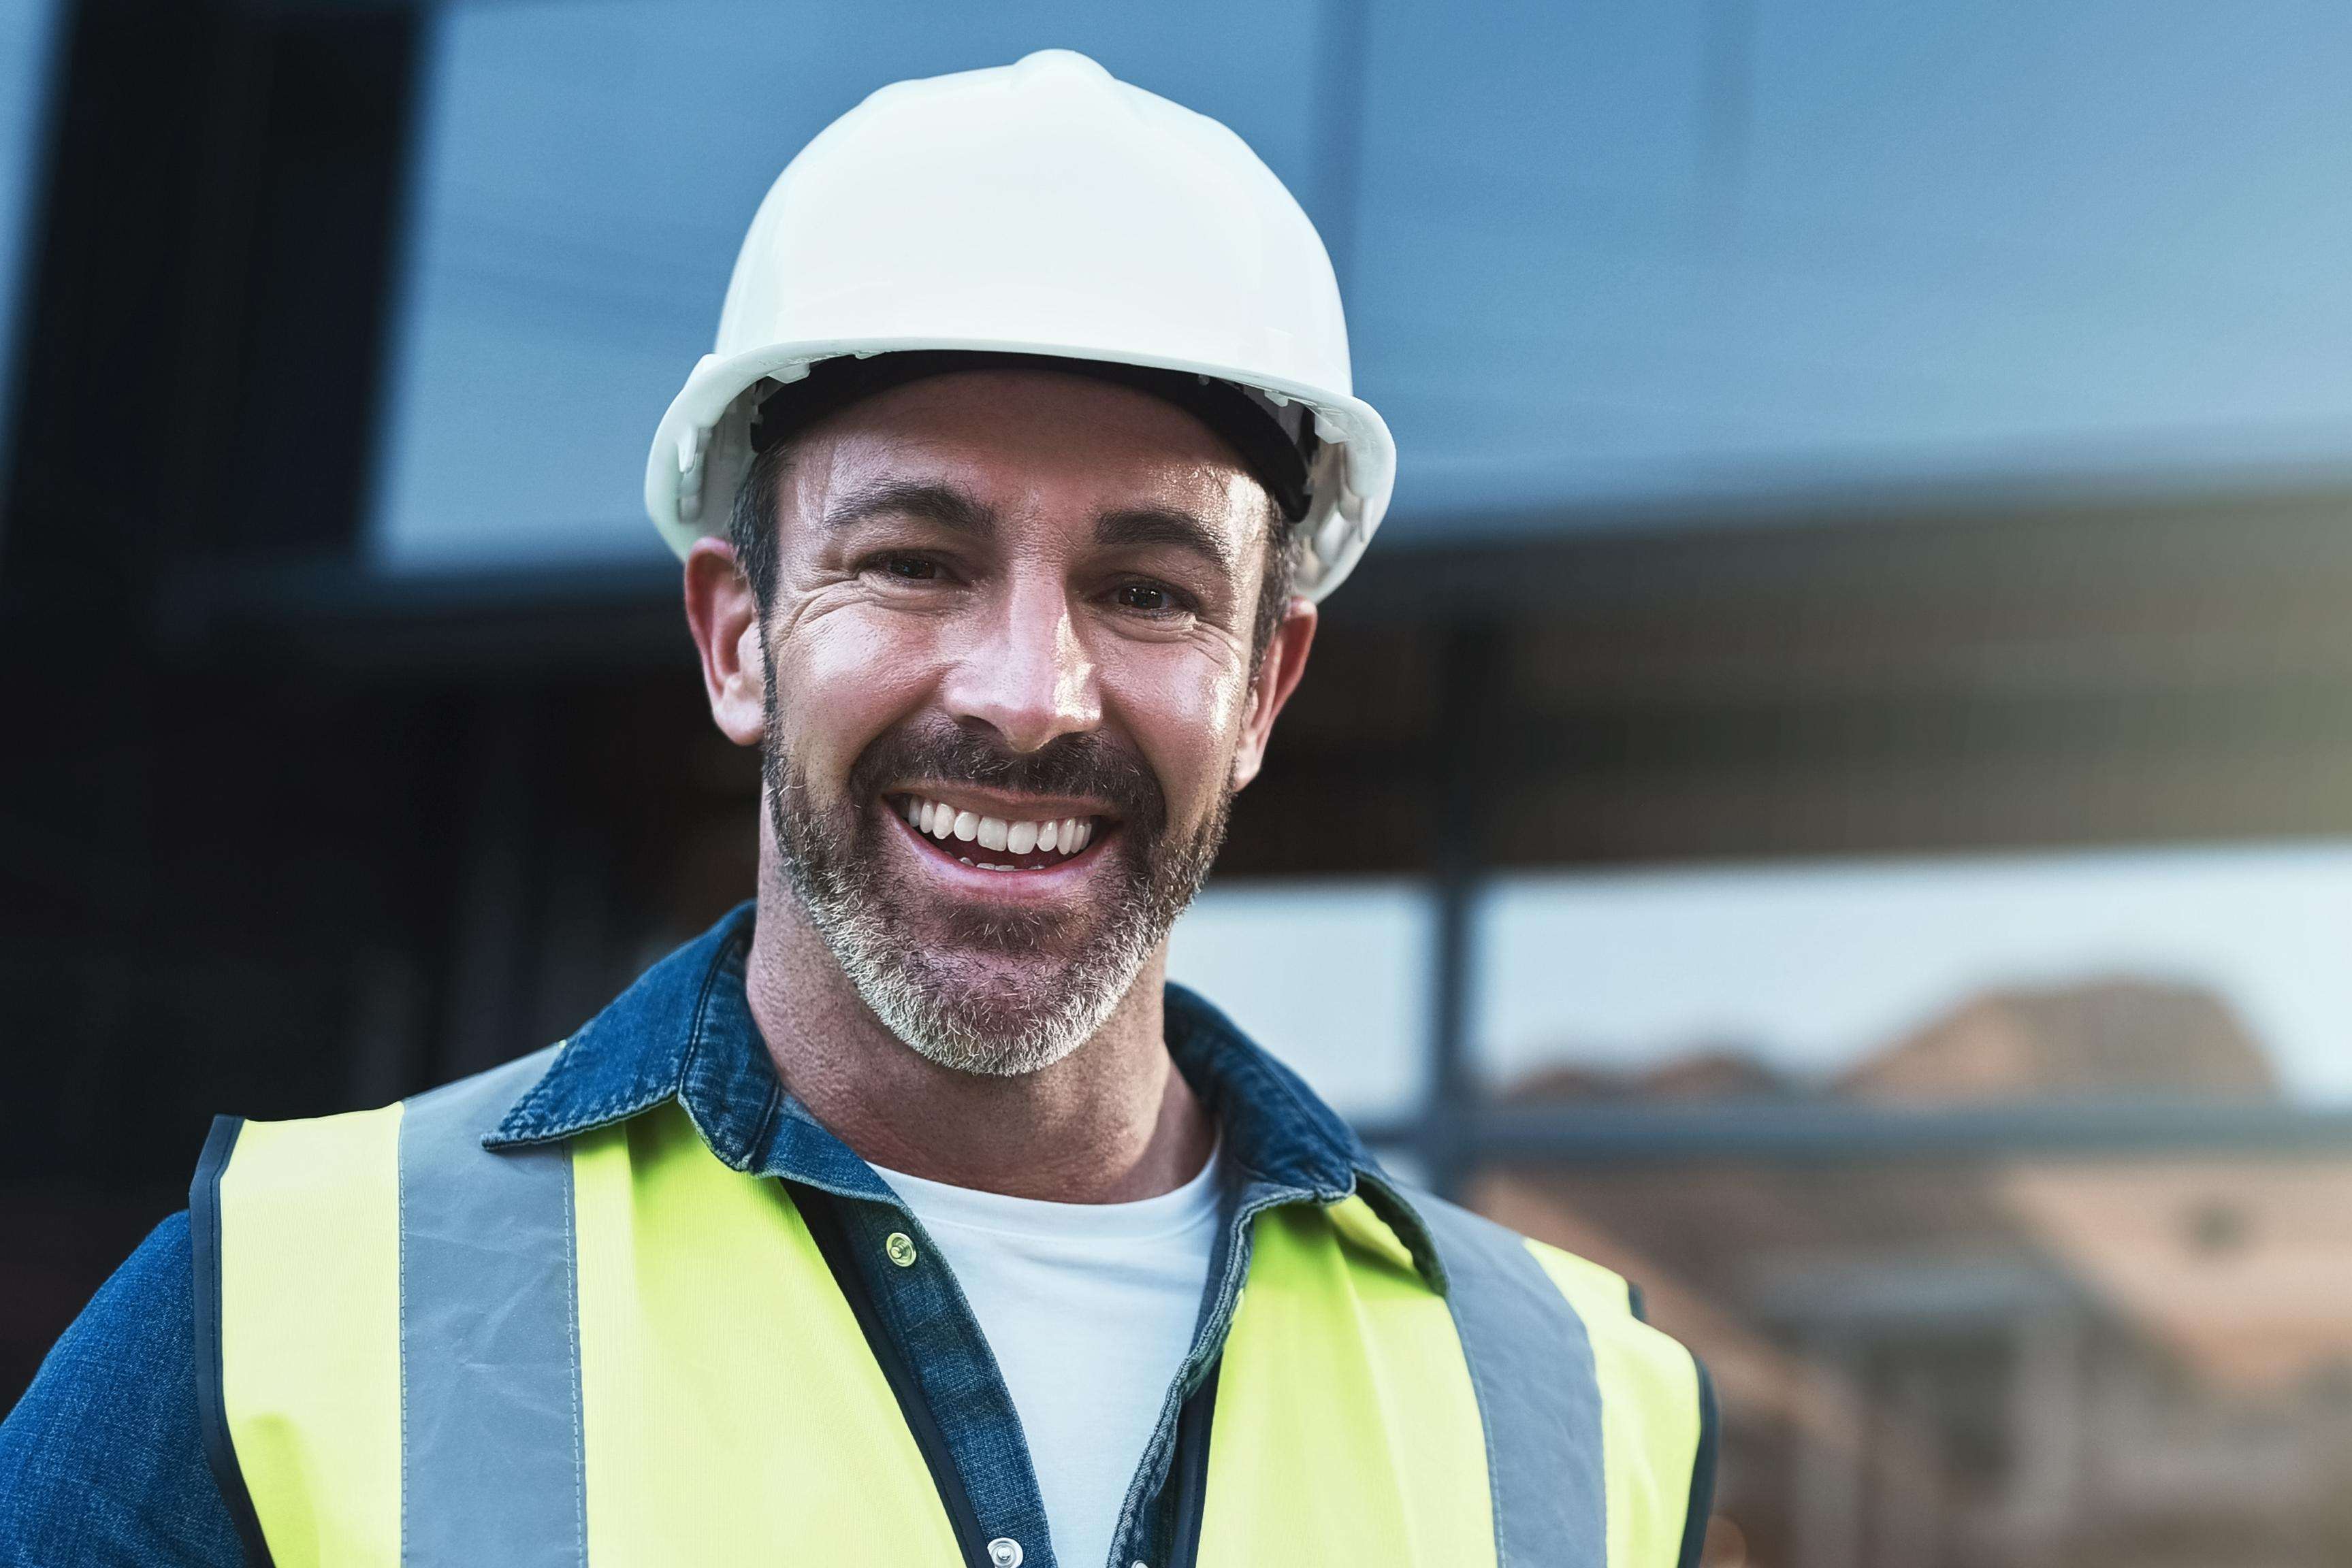 Man wears a safety helmet and other protective clothing while smiling at the camera.